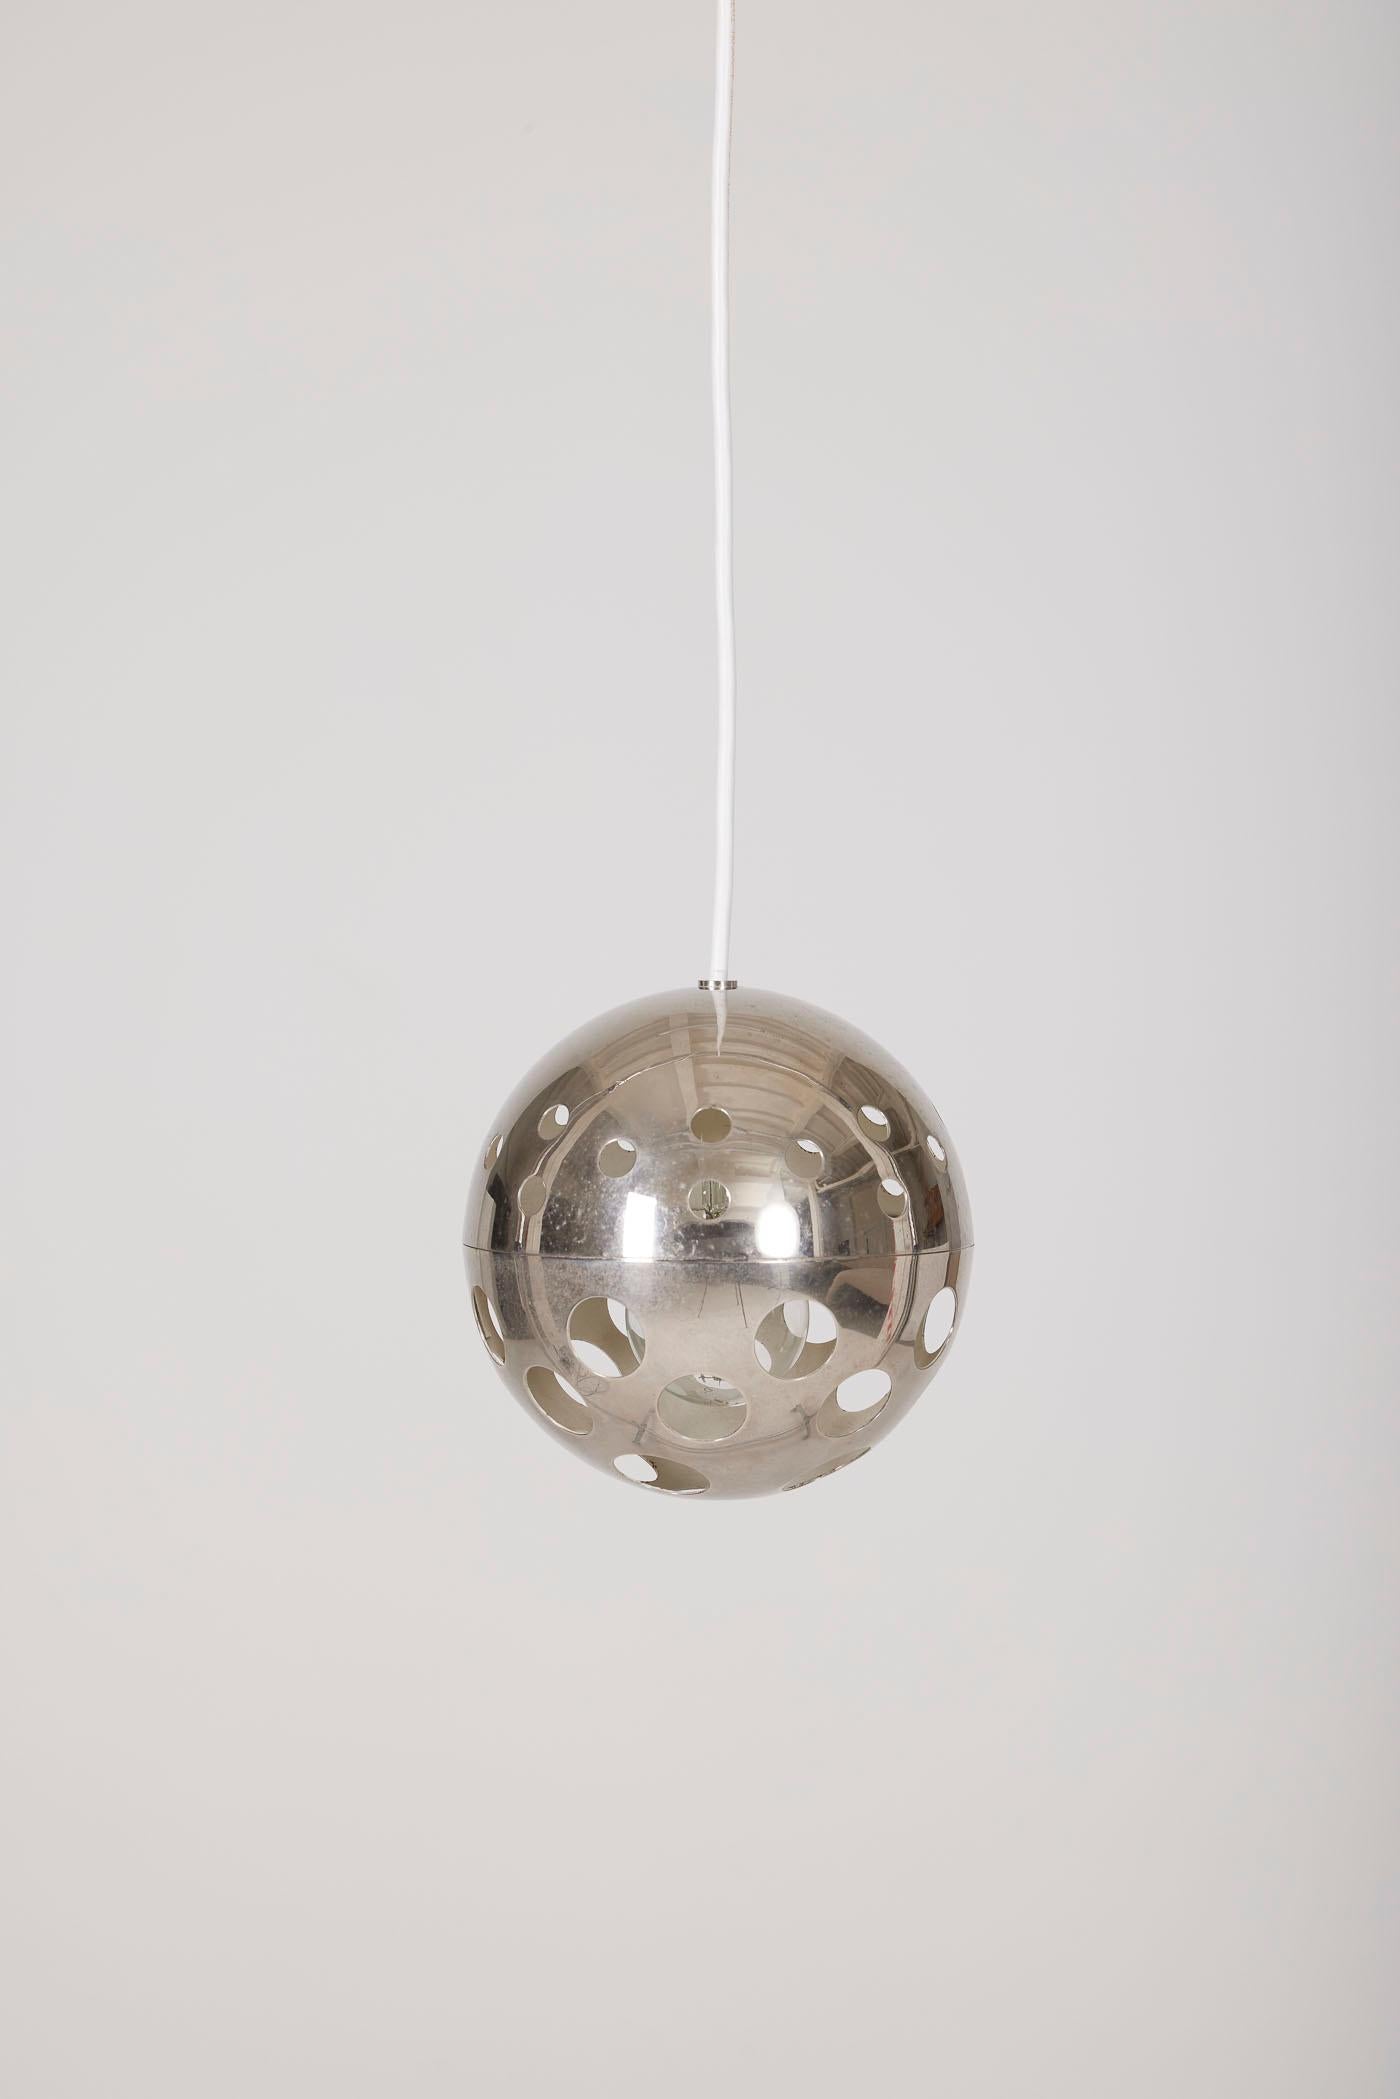 A spherical pendant light by Sabine Charoy, published by Verre Lumière, 1970s. Rare perforated metal suspension. Very slight signs of wear
LP1155